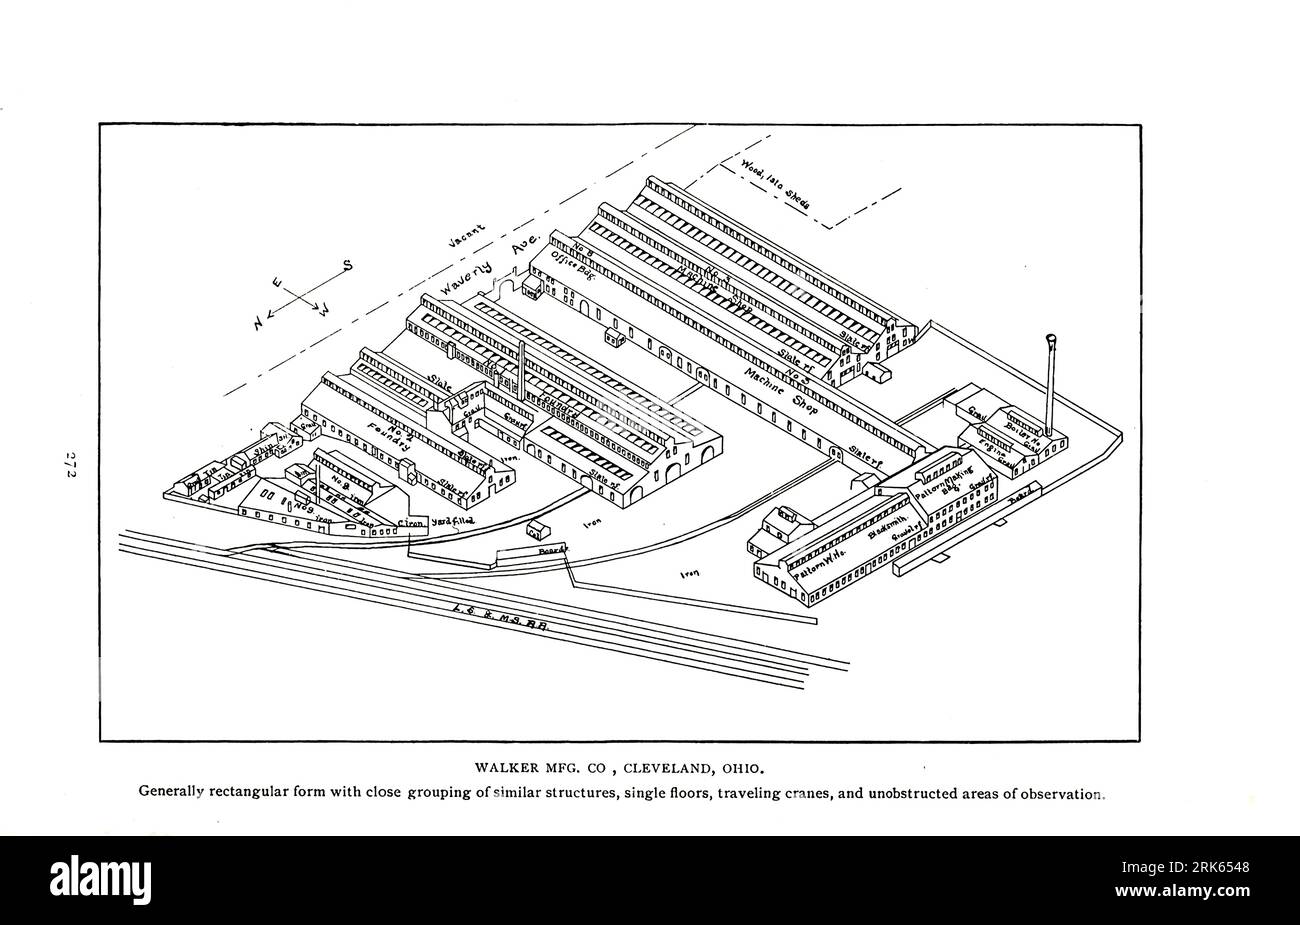 Wlaker Mfg. Co. Cleveland, Ohio Generelly rectangular form with close grouping of similar structures, single floor traveling cranes and unobstructed areas of observation from the Article MODERN MACHINE-SHOP ECONOMICS PRIME REQUISITES OF SHOP CONSTRUCTION By Horace L. Arnold from The Engineering Magazine DEVOTED TO INDUSTRIAL PROGRESS Volume XI October 1896 NEW YORK The Engineering Magazine Co Stock Photo